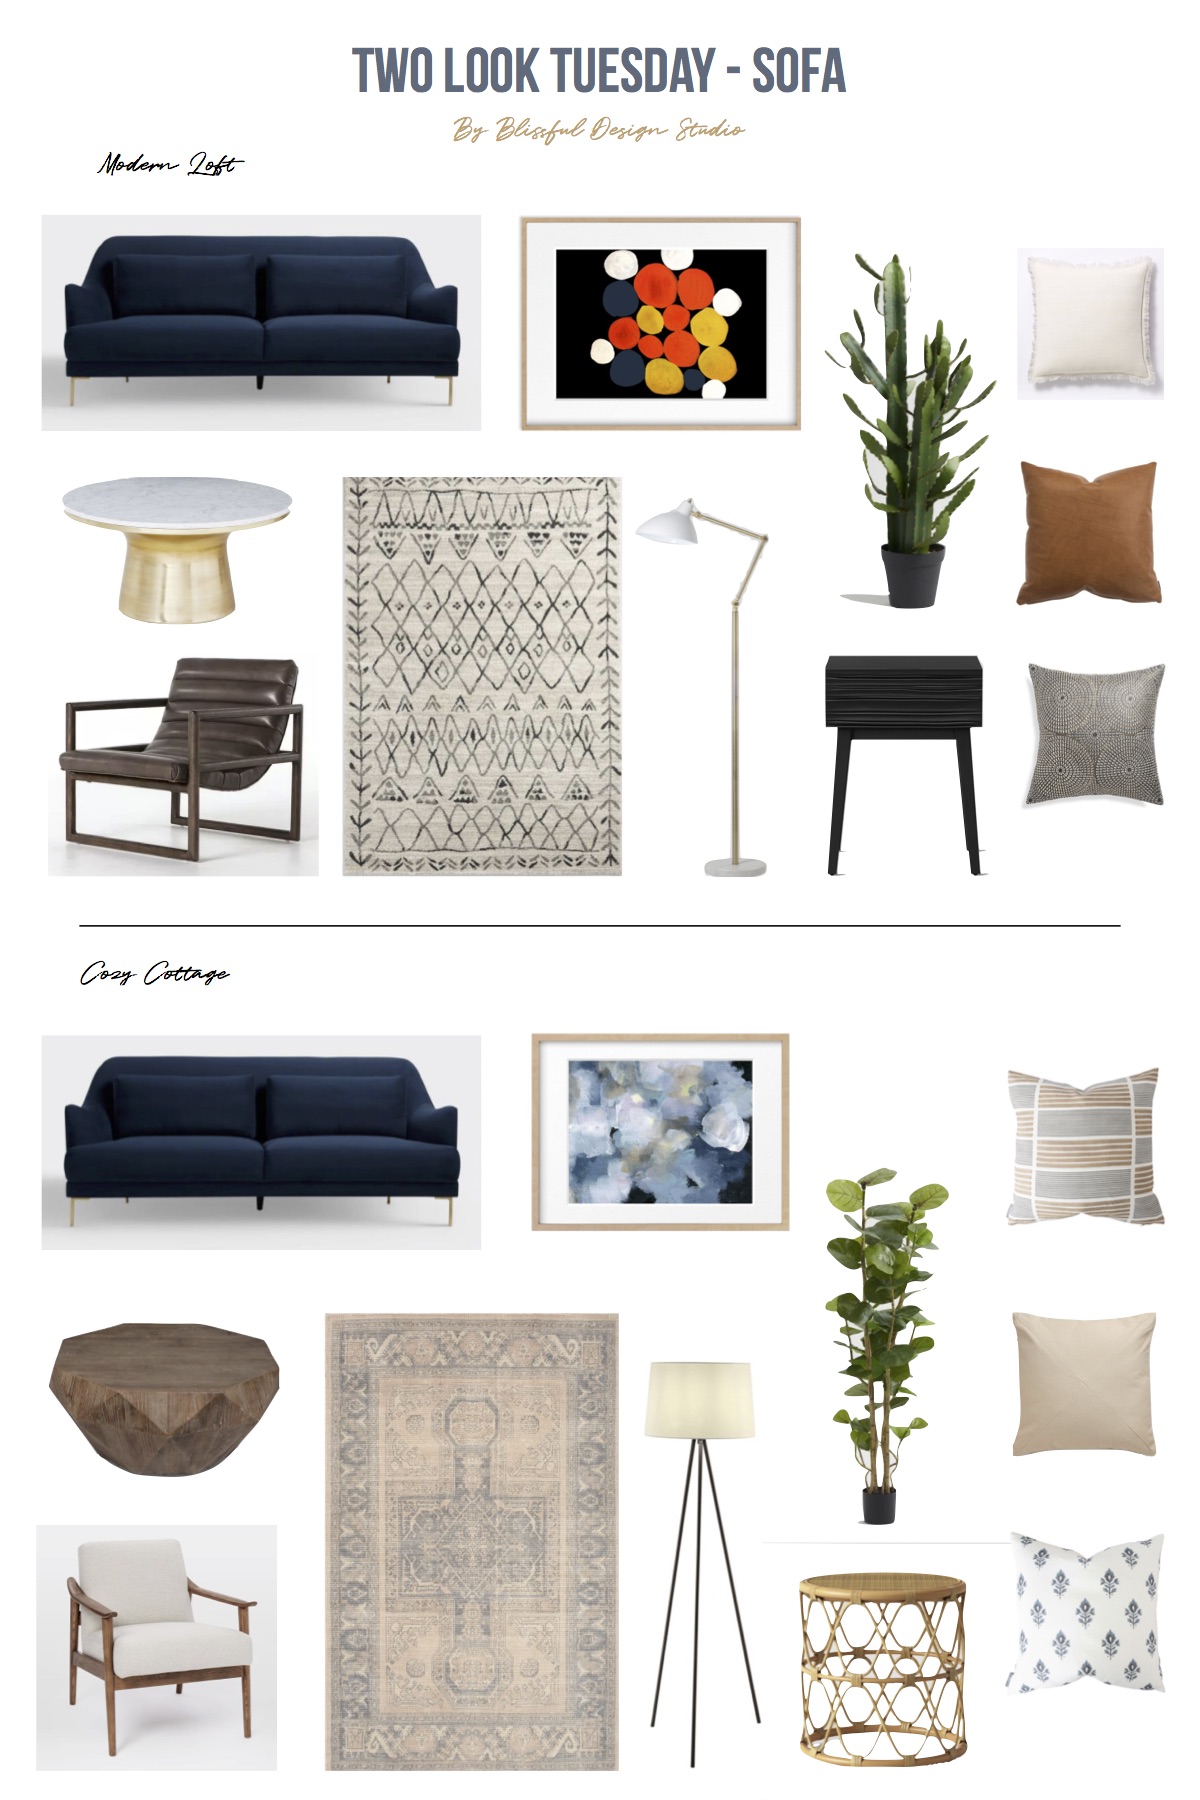 How to style a bold blue sofa 2 different ways - Modern Loft and Cozy Cottage.